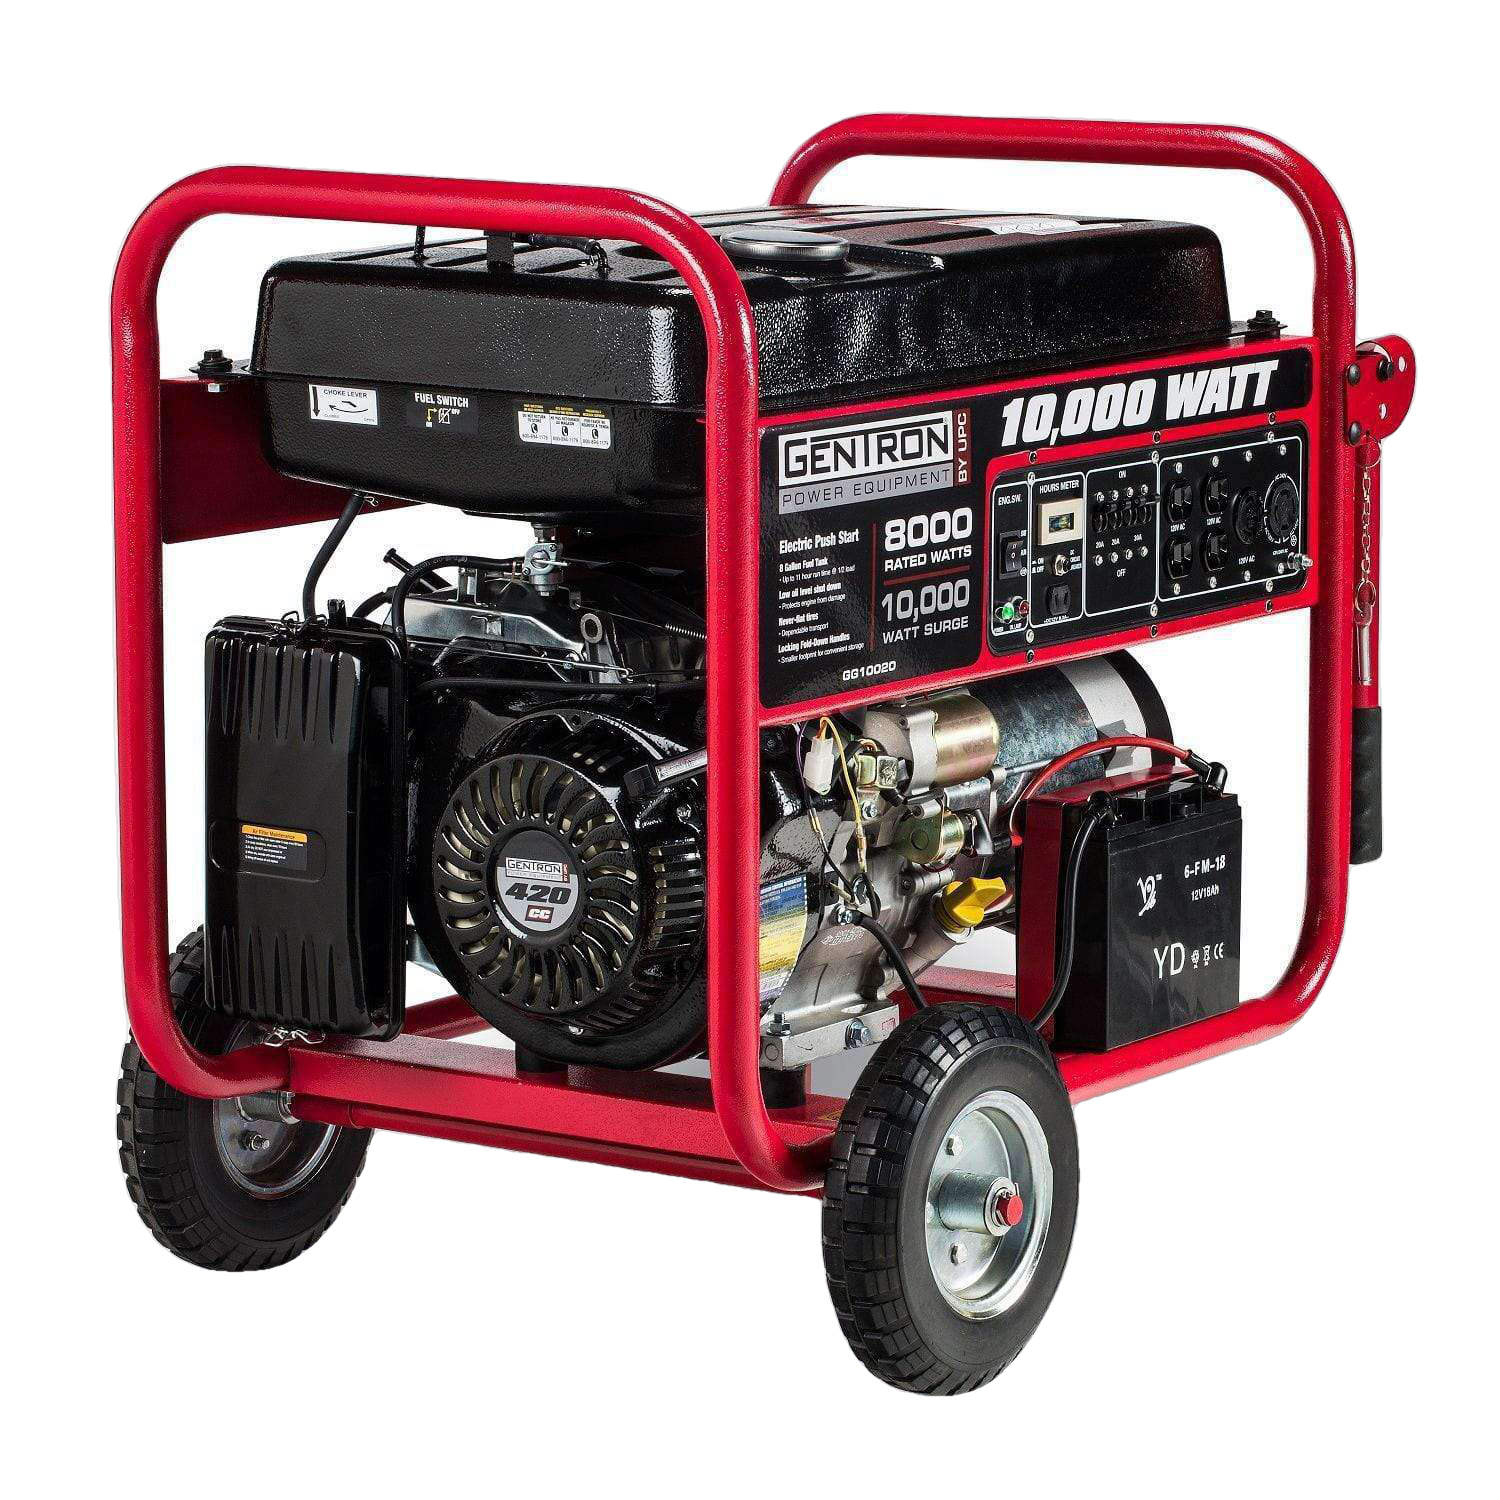 Gentron, Gentron GG10020C 8000W/1000W Electric Start Portable Gas Generator Carb Compliant New